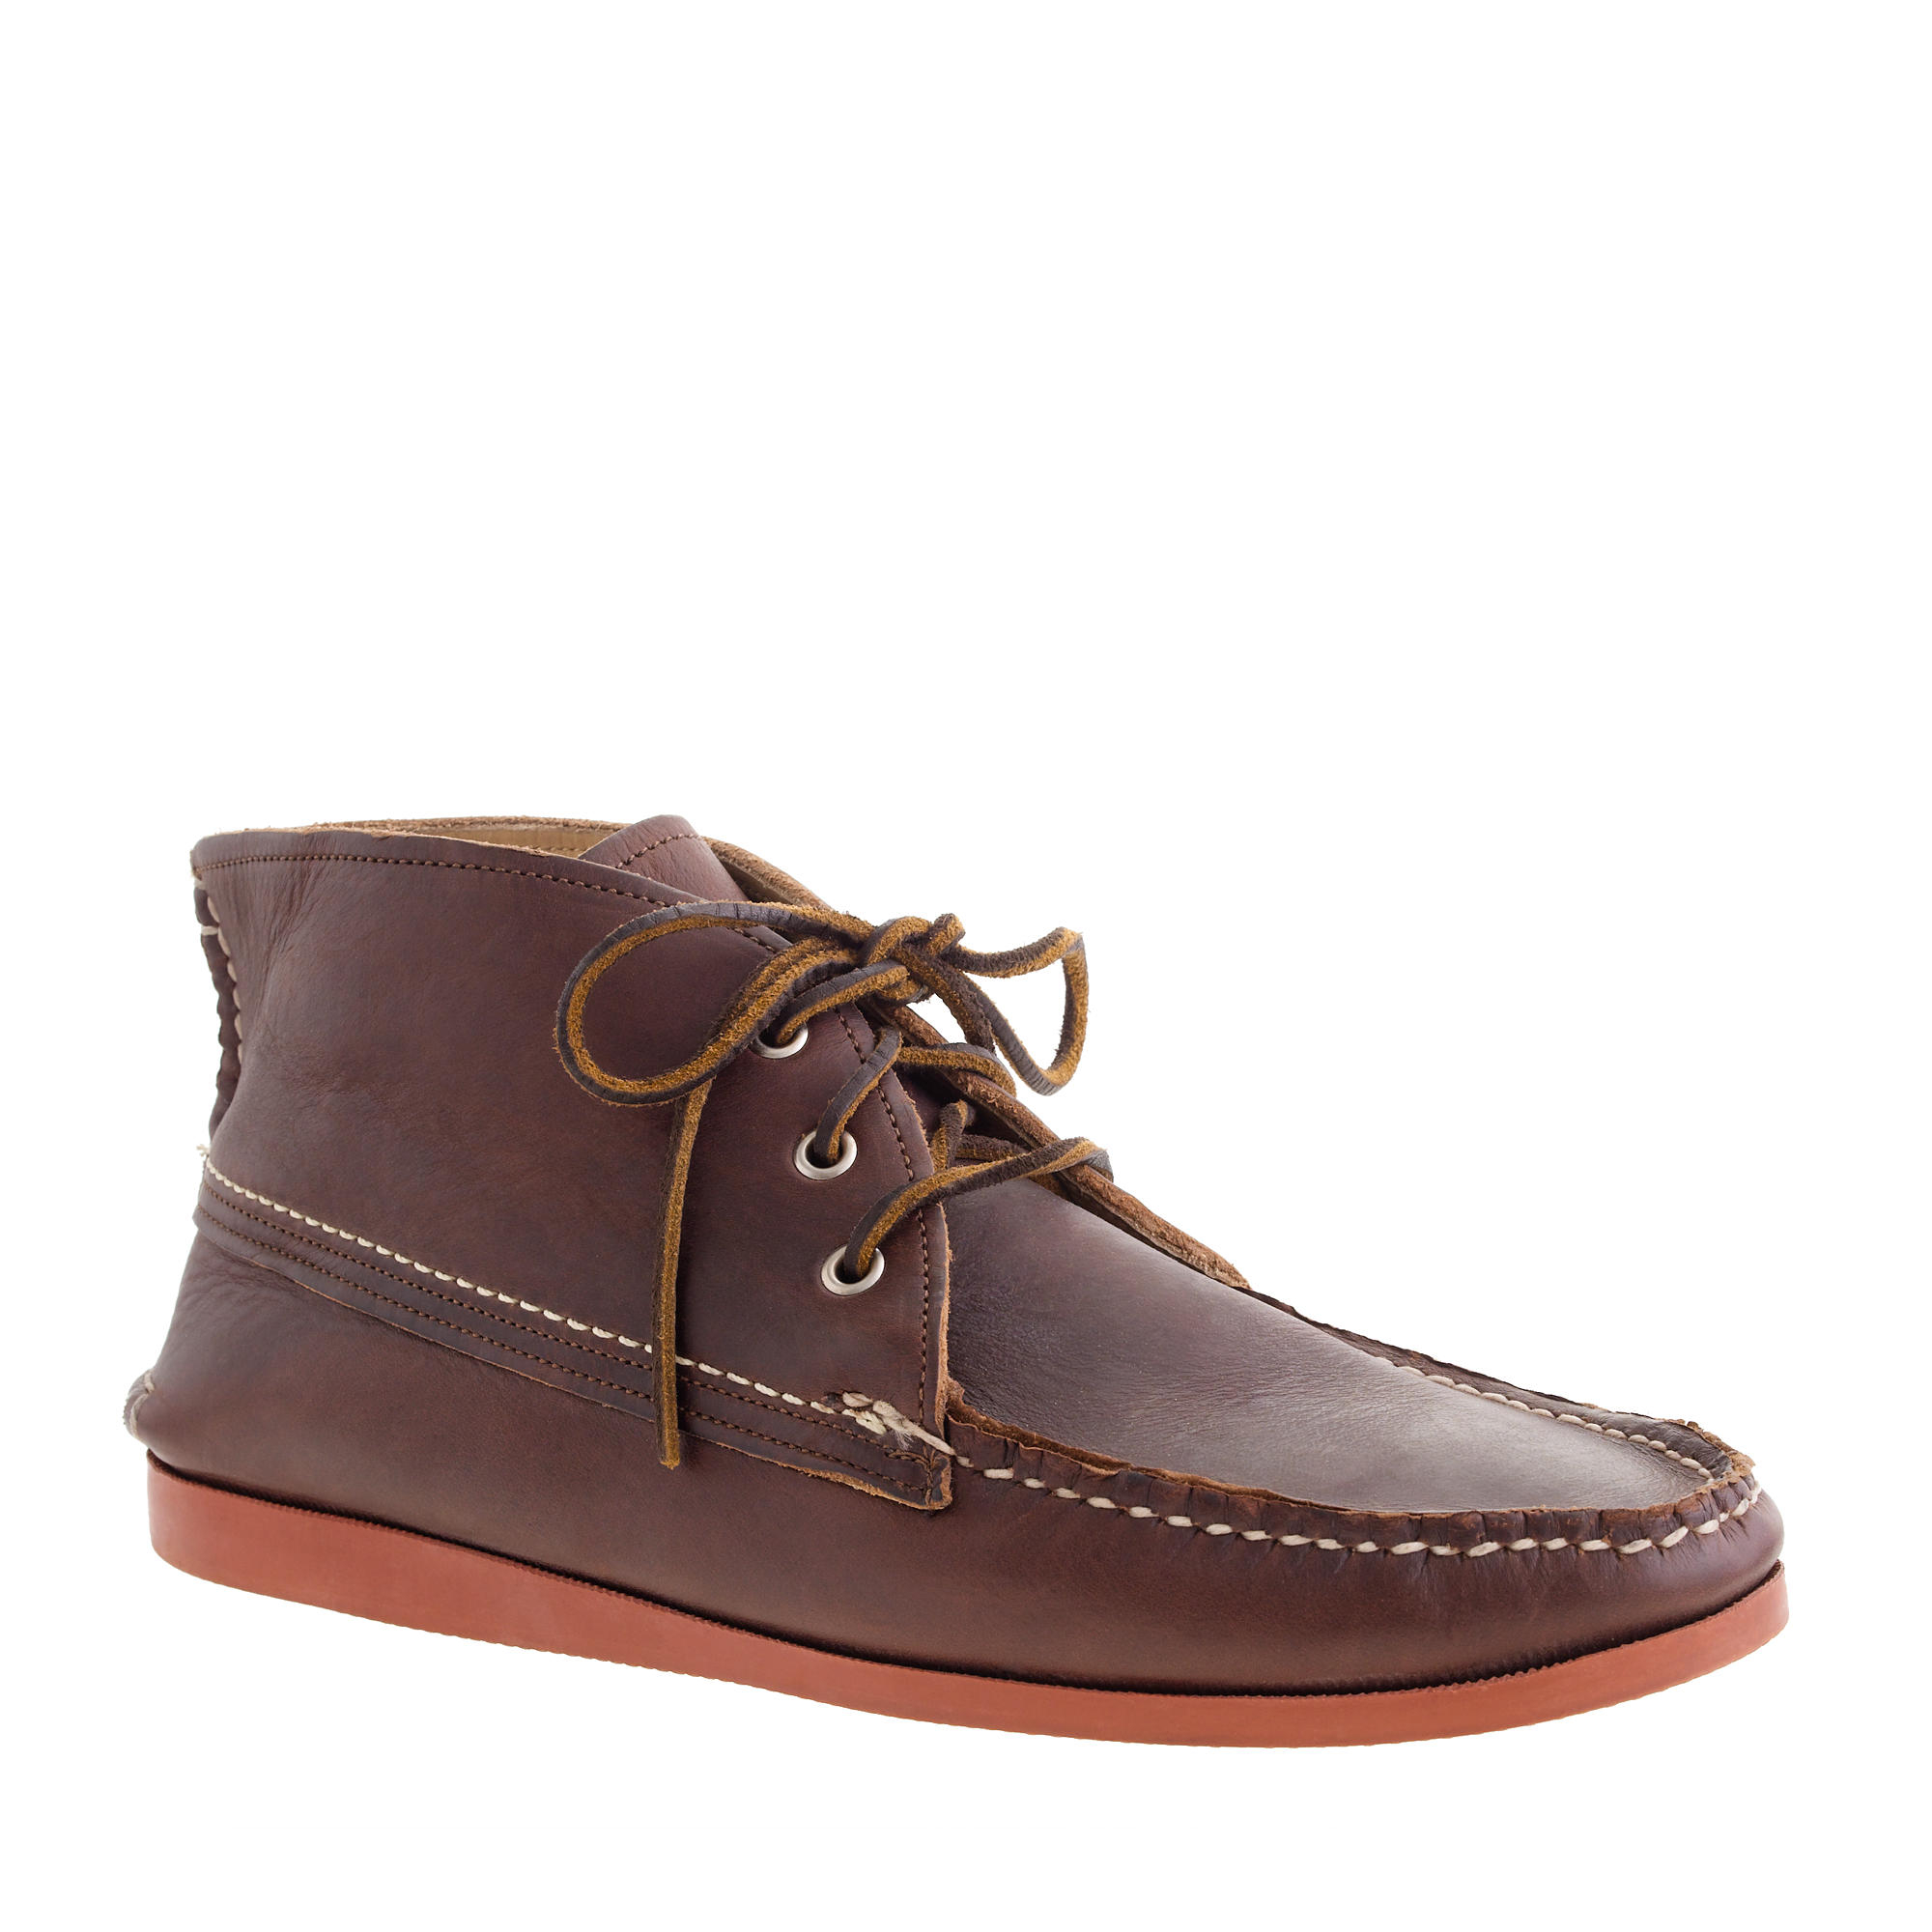 Lyst - J.Crew Men's Quoddy Leather Chukka Boots in Brown for Men